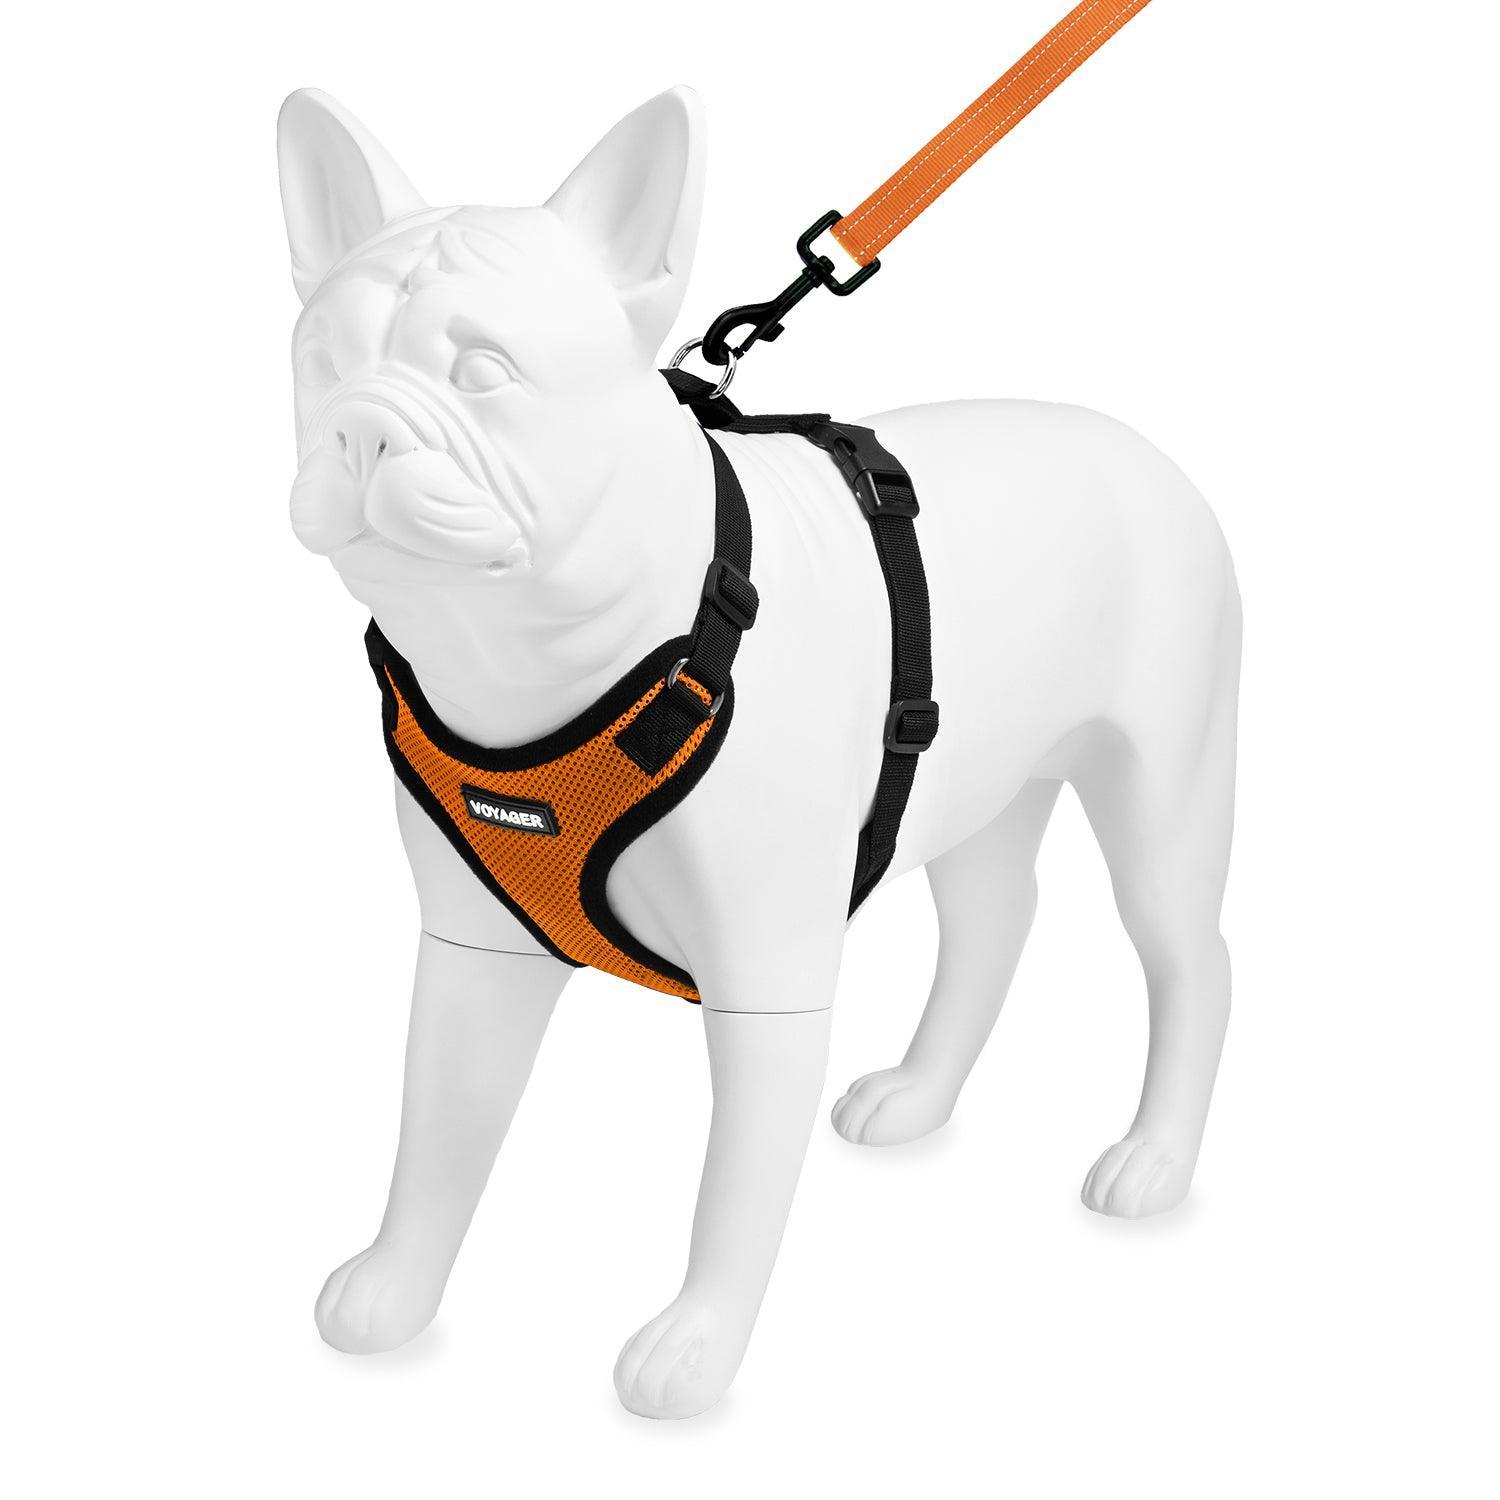 Step-In Lock Harness & Leash Combo Set - VOYAGER Dog Harnesses